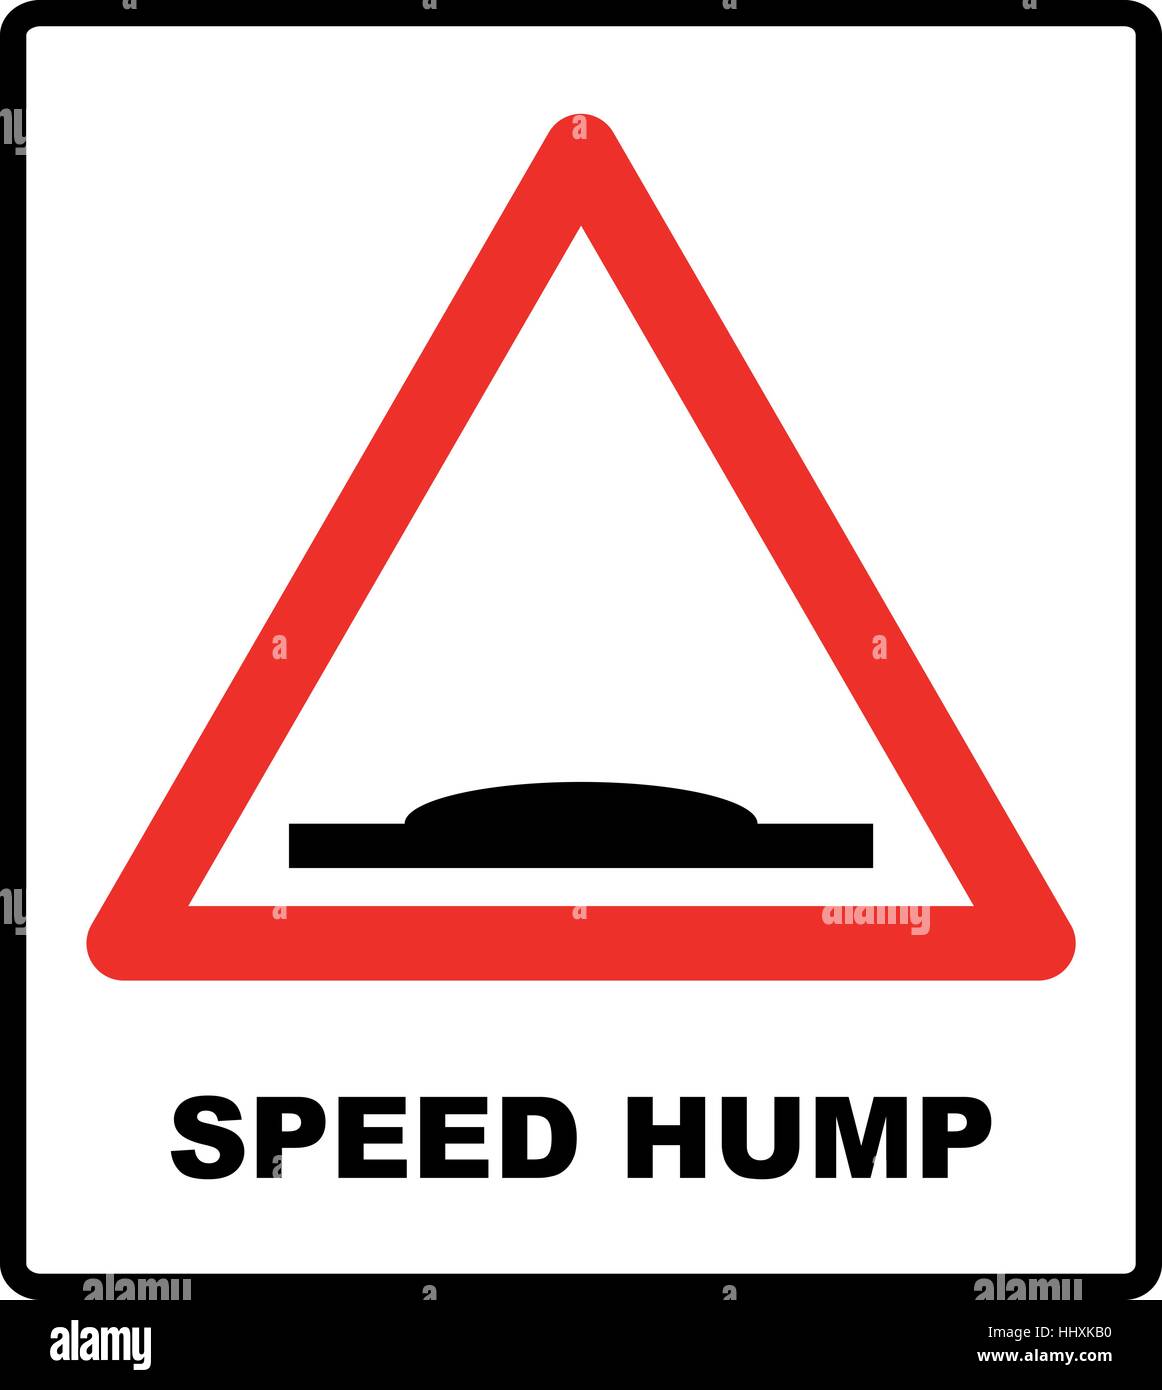 Speed bumps warning of traffic signs. Bump symbol for road in red triangle isolated on white. Vector illustration Stock Vector